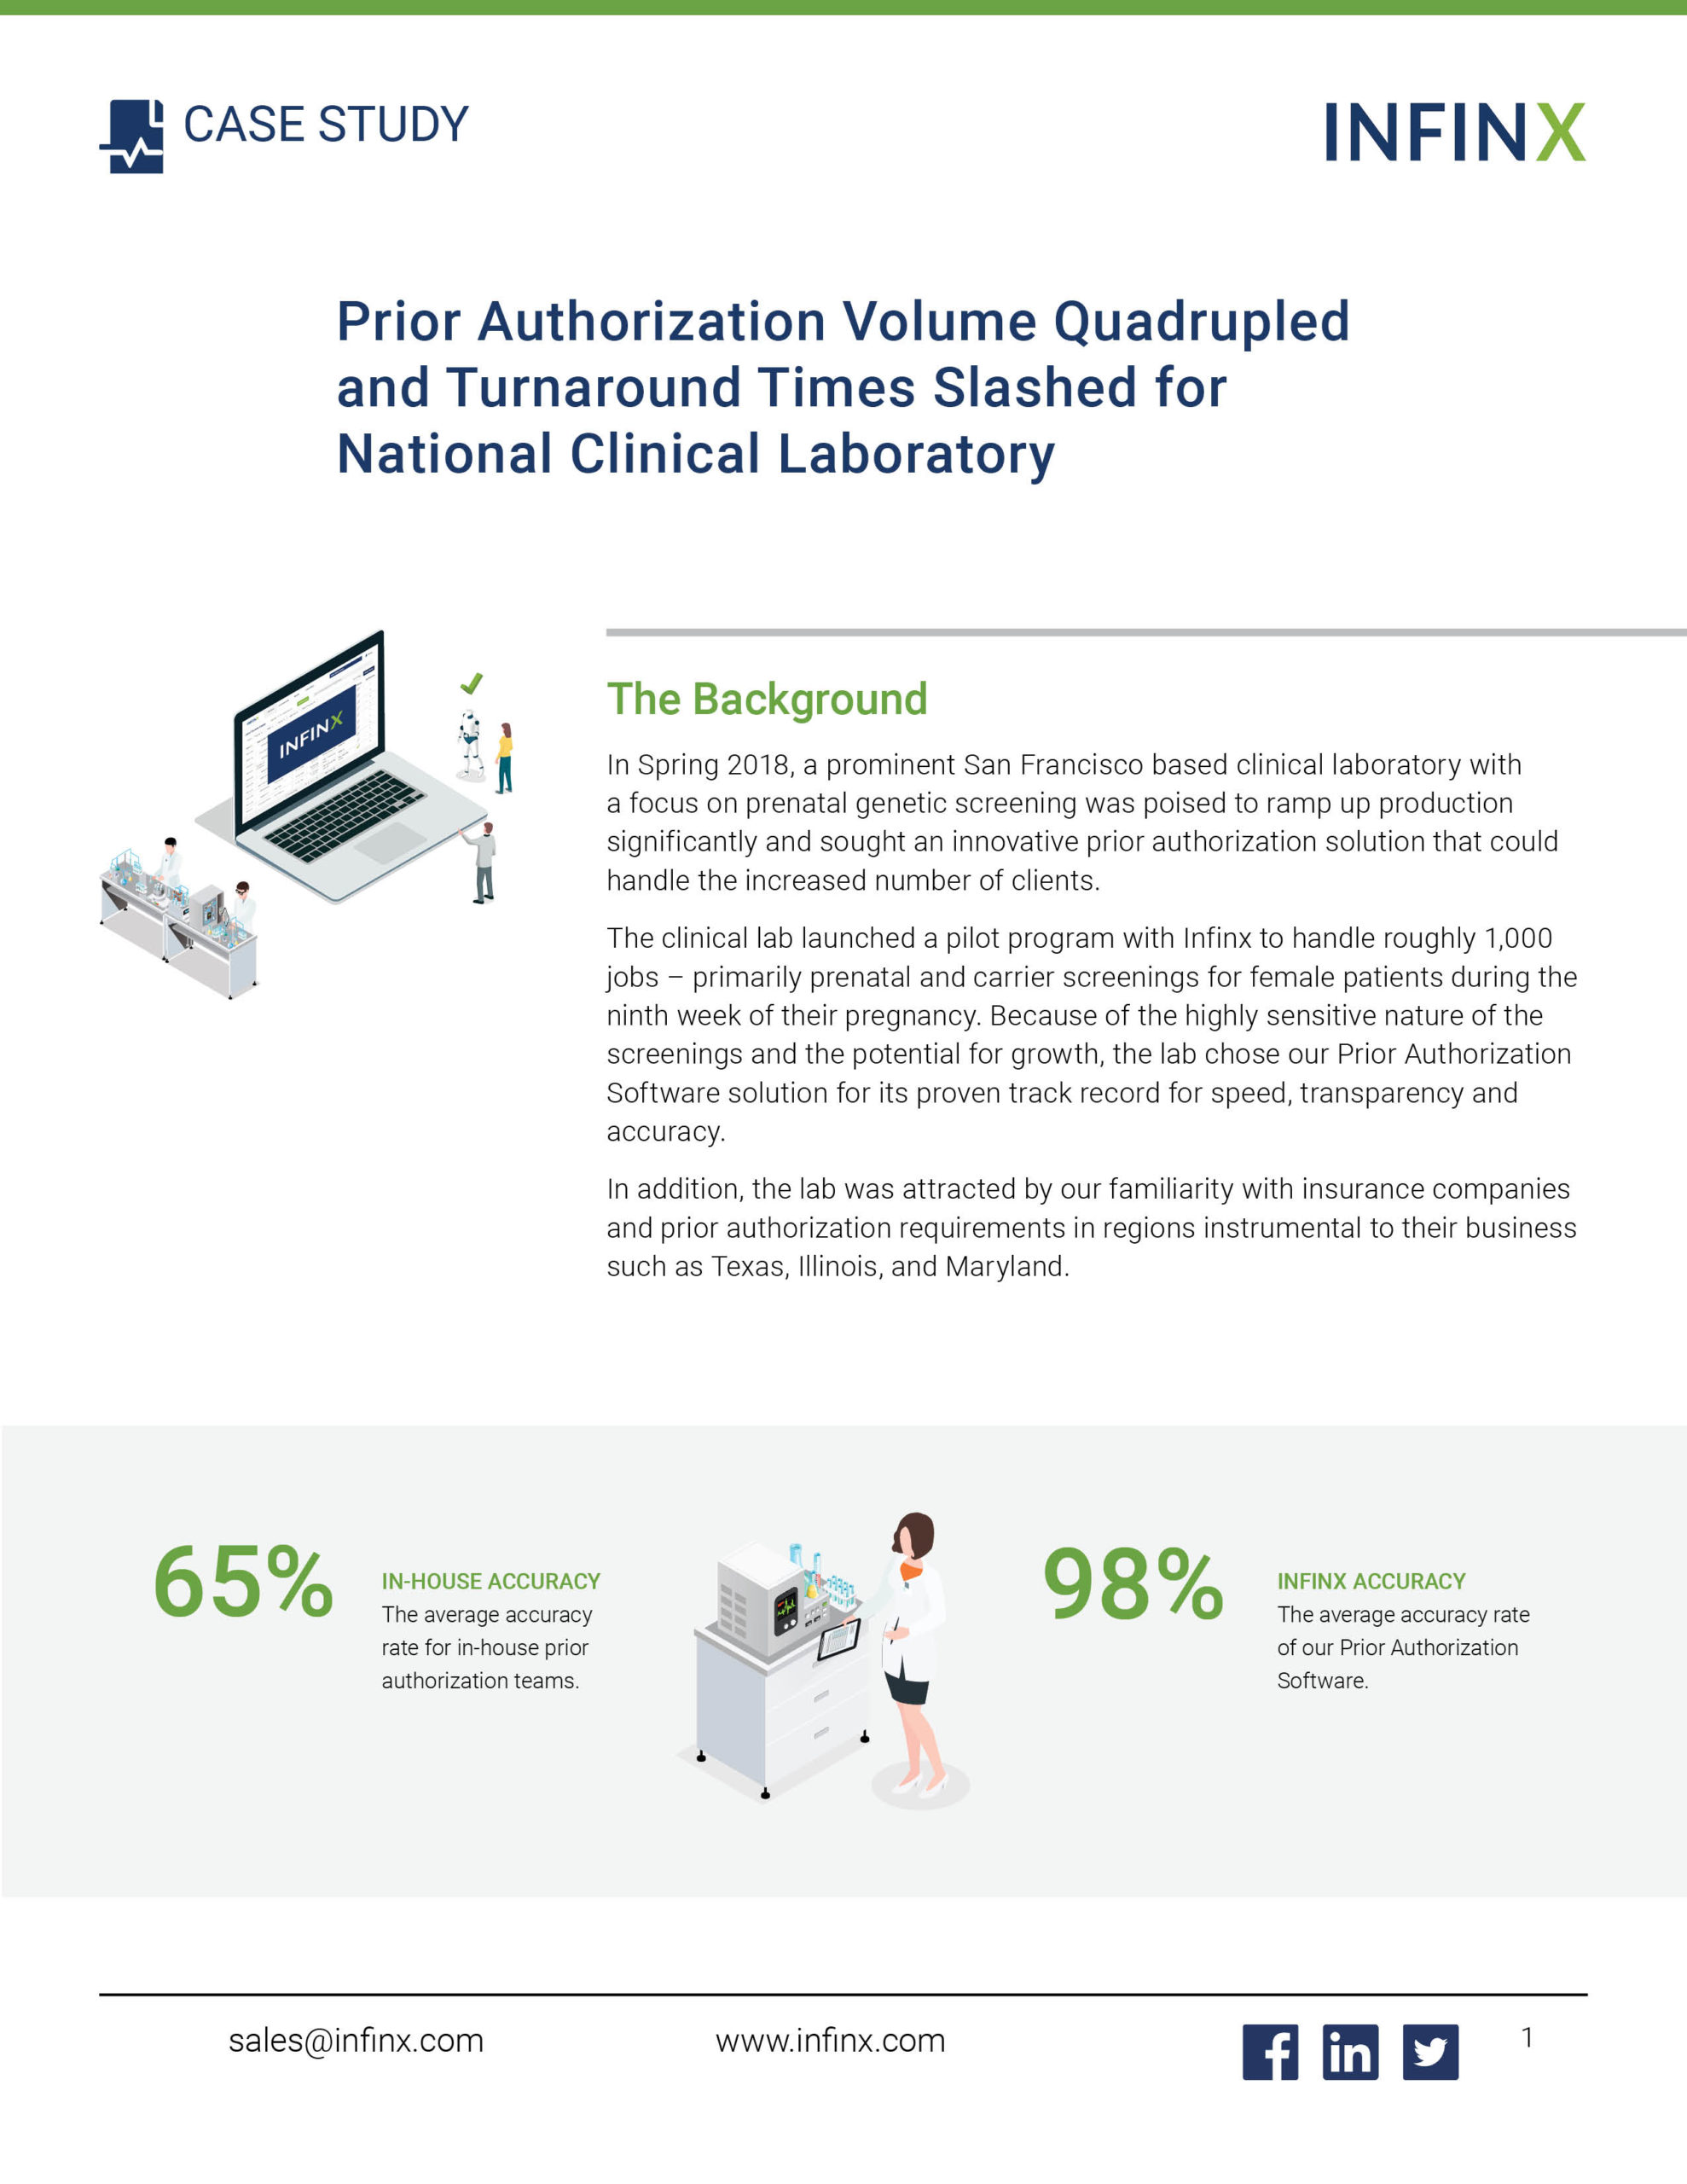 Infinx - Case Study - Prior Authorization Volume Quadrupled and Turnaround Times Slashed for National Clinical Laboratory - May2021 1